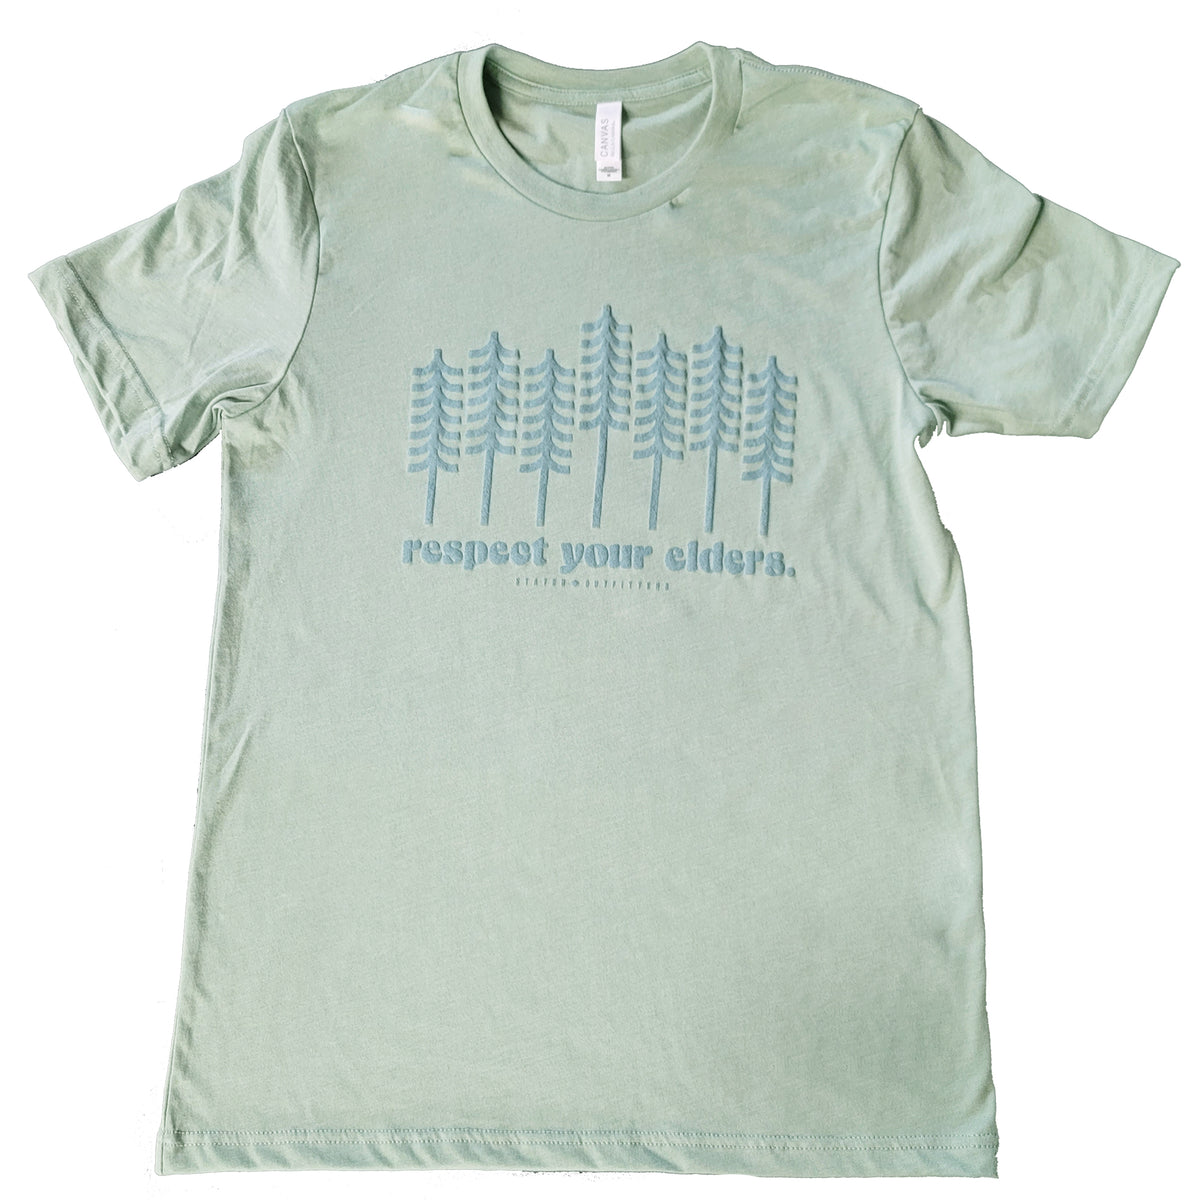 Stated Outfitters Respect Your Elders Tee